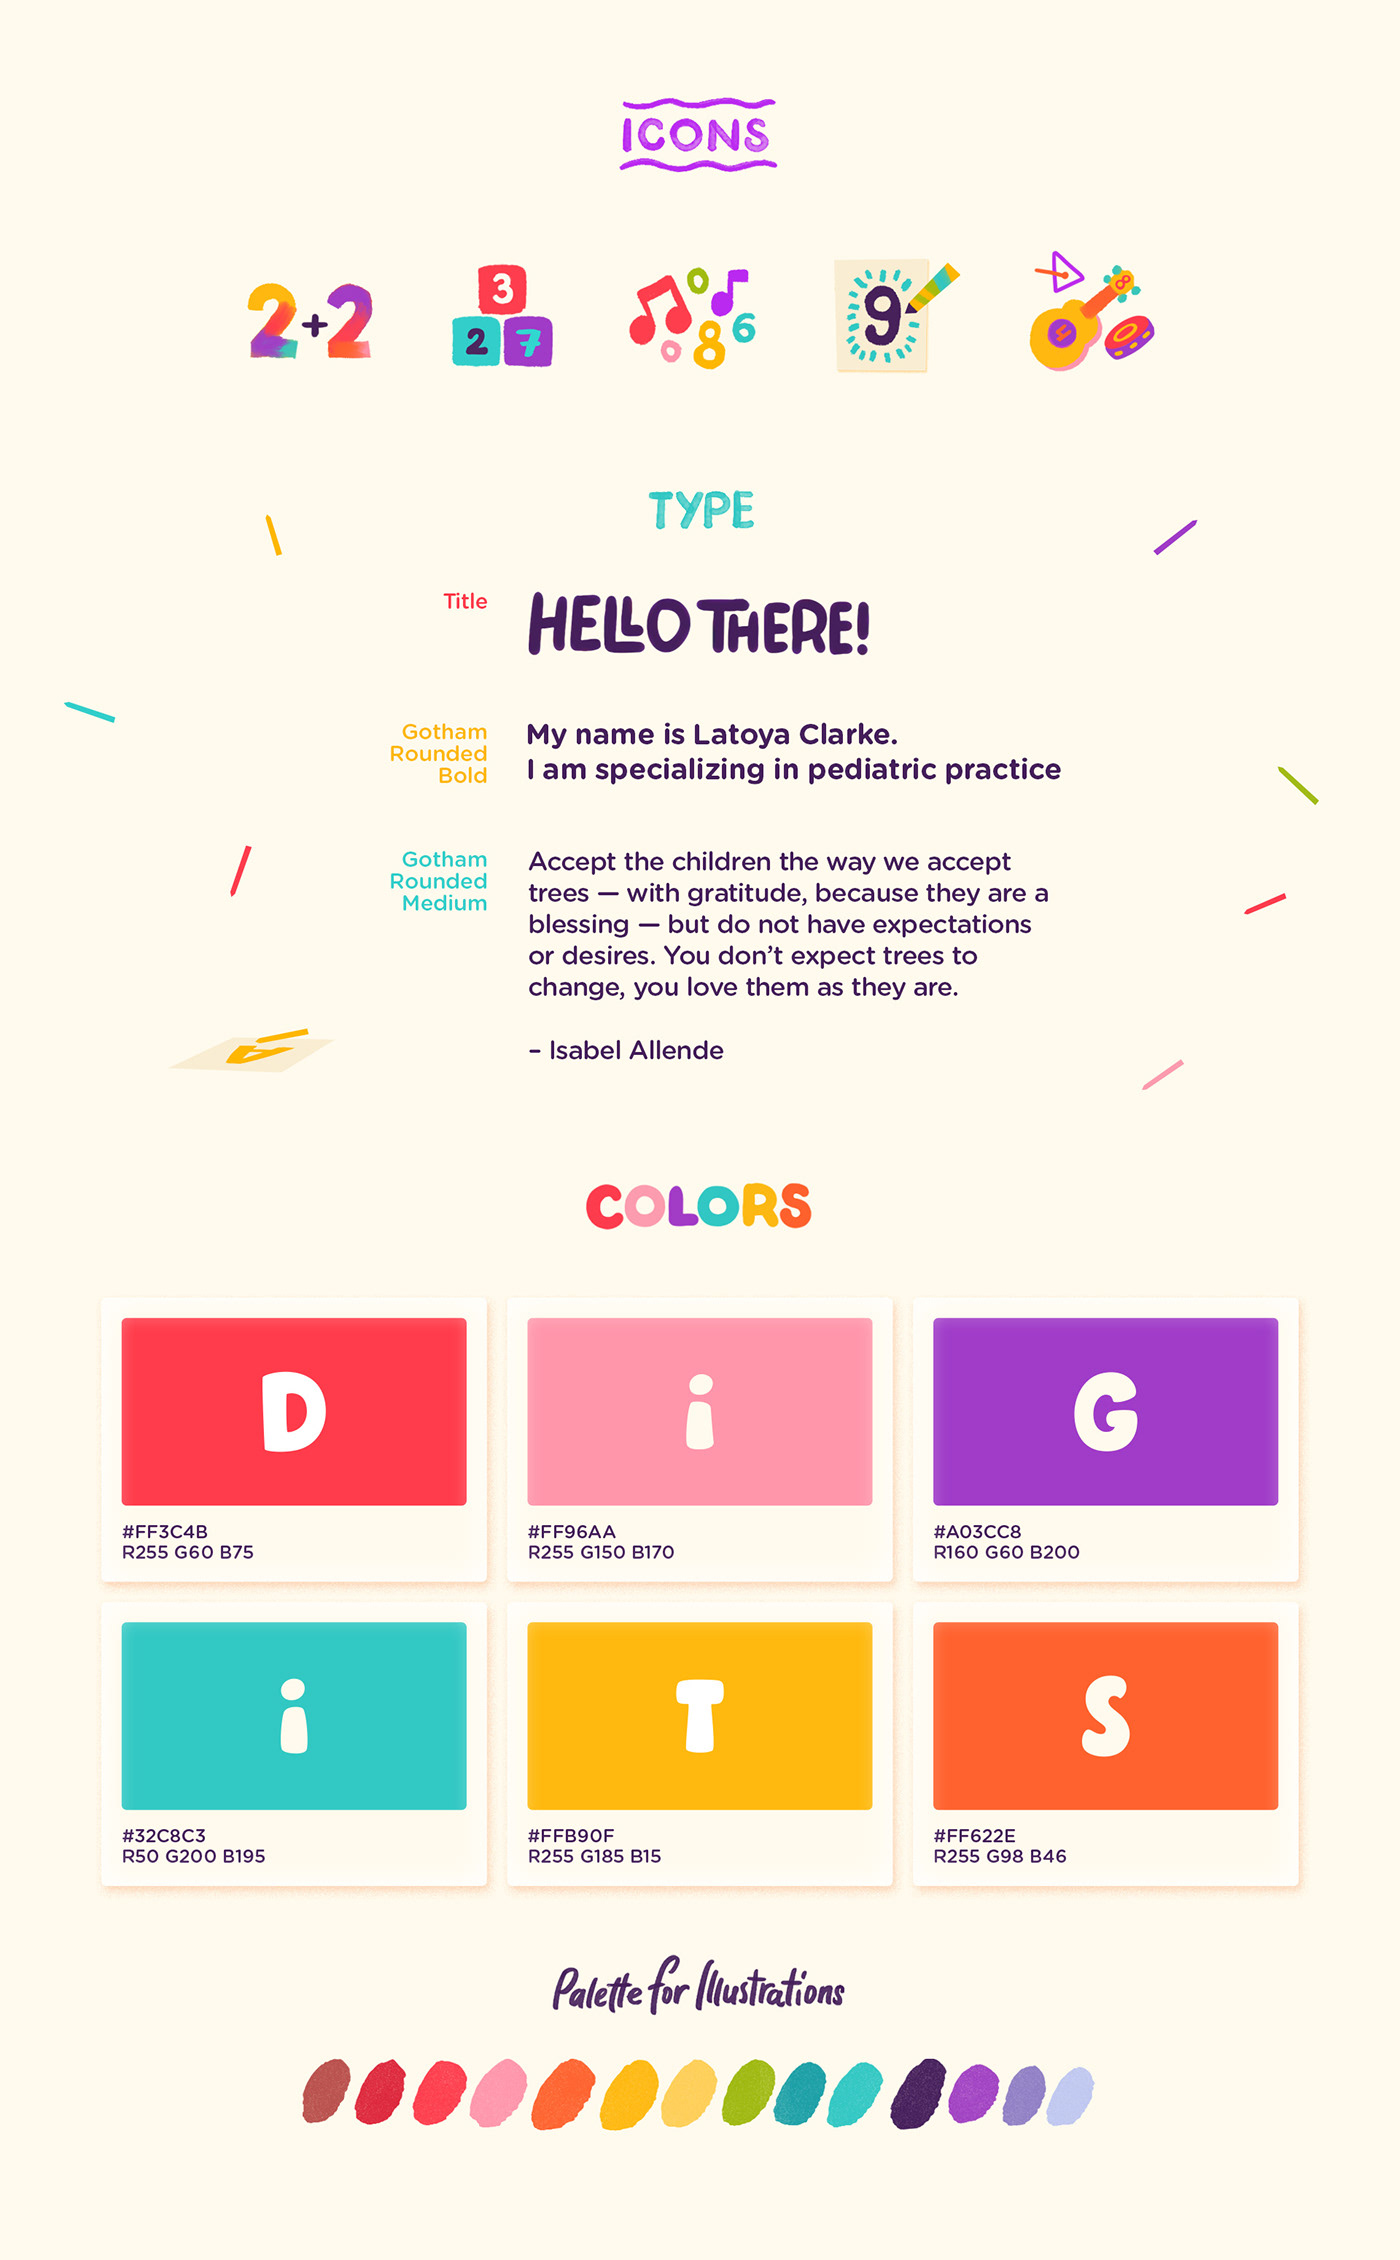 Cute kids icons, brand typography, brand colors